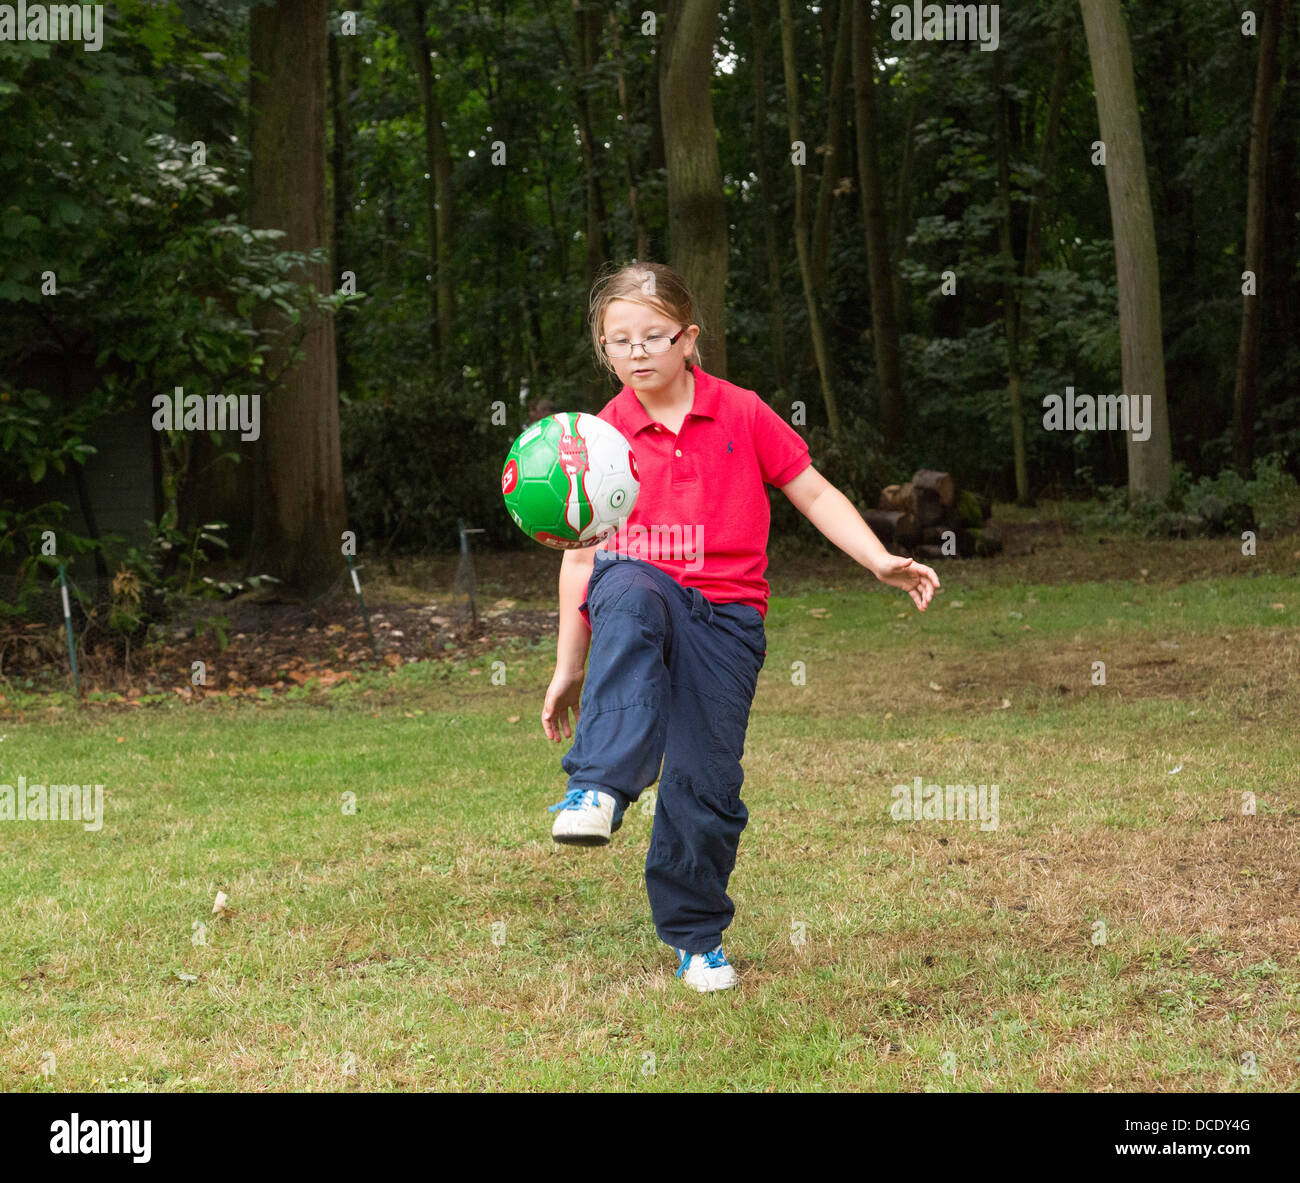 young girl kicking a soccer ball around in back yard Stock Photo